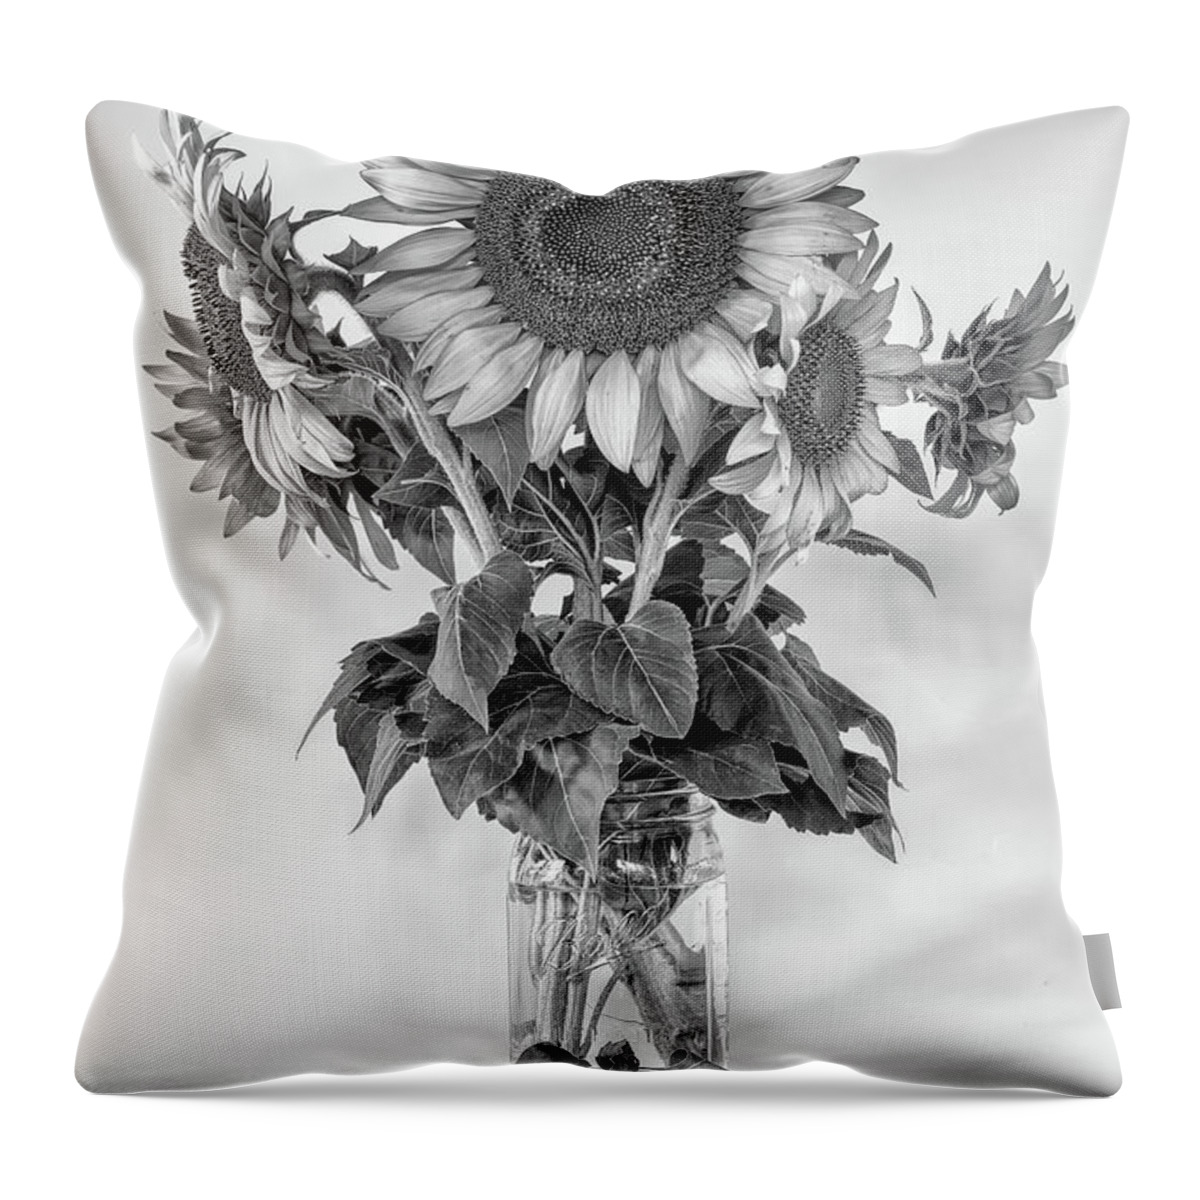 Sunflowers Throw Pillow featuring the photograph Fresh Cut by Nicki McManus